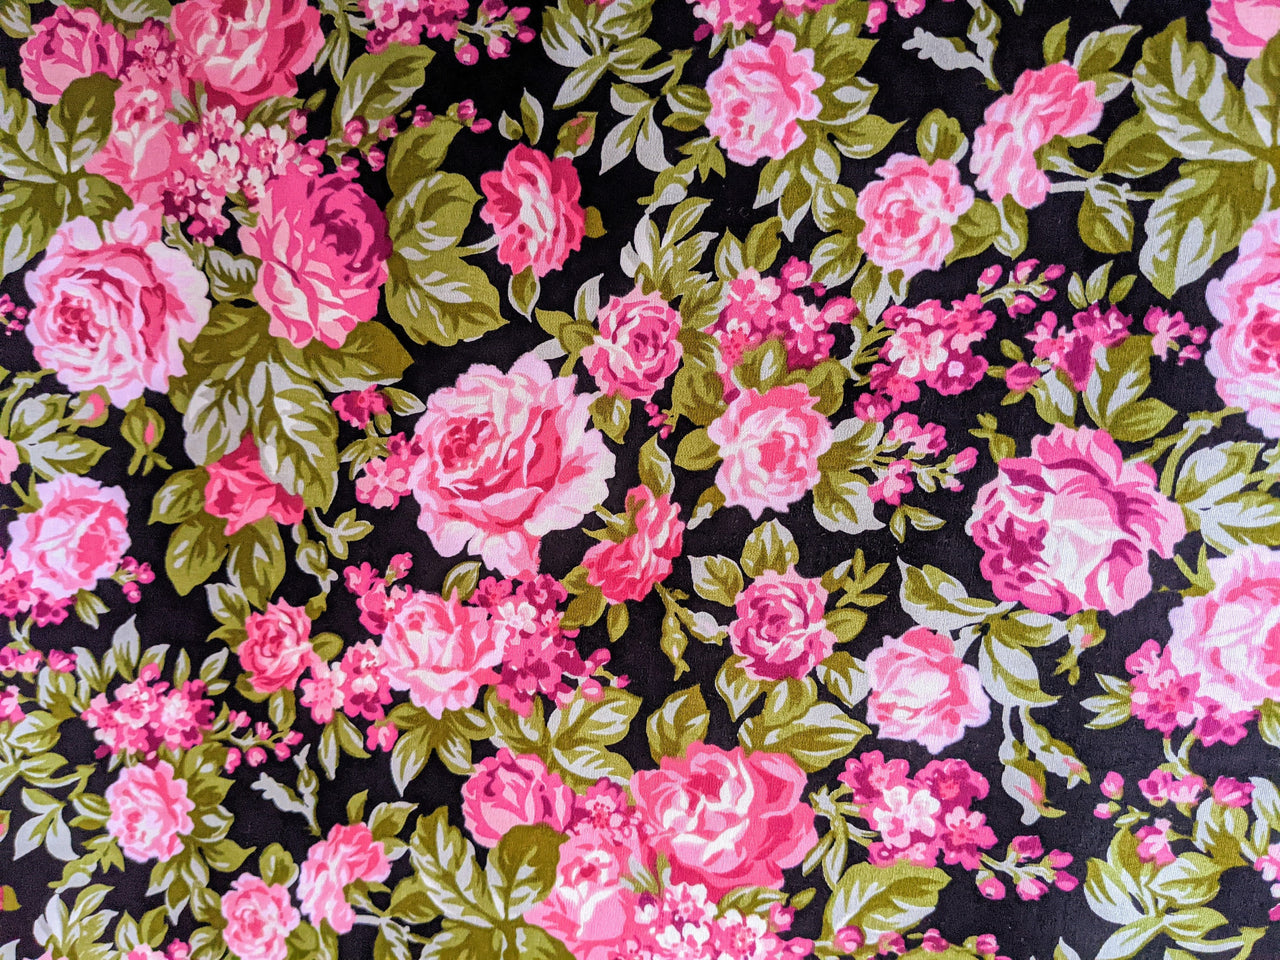 Black And Pink 100 % Cotton Rose Floral Fabric, Floral Print Fabric, Roses Flower Fabric